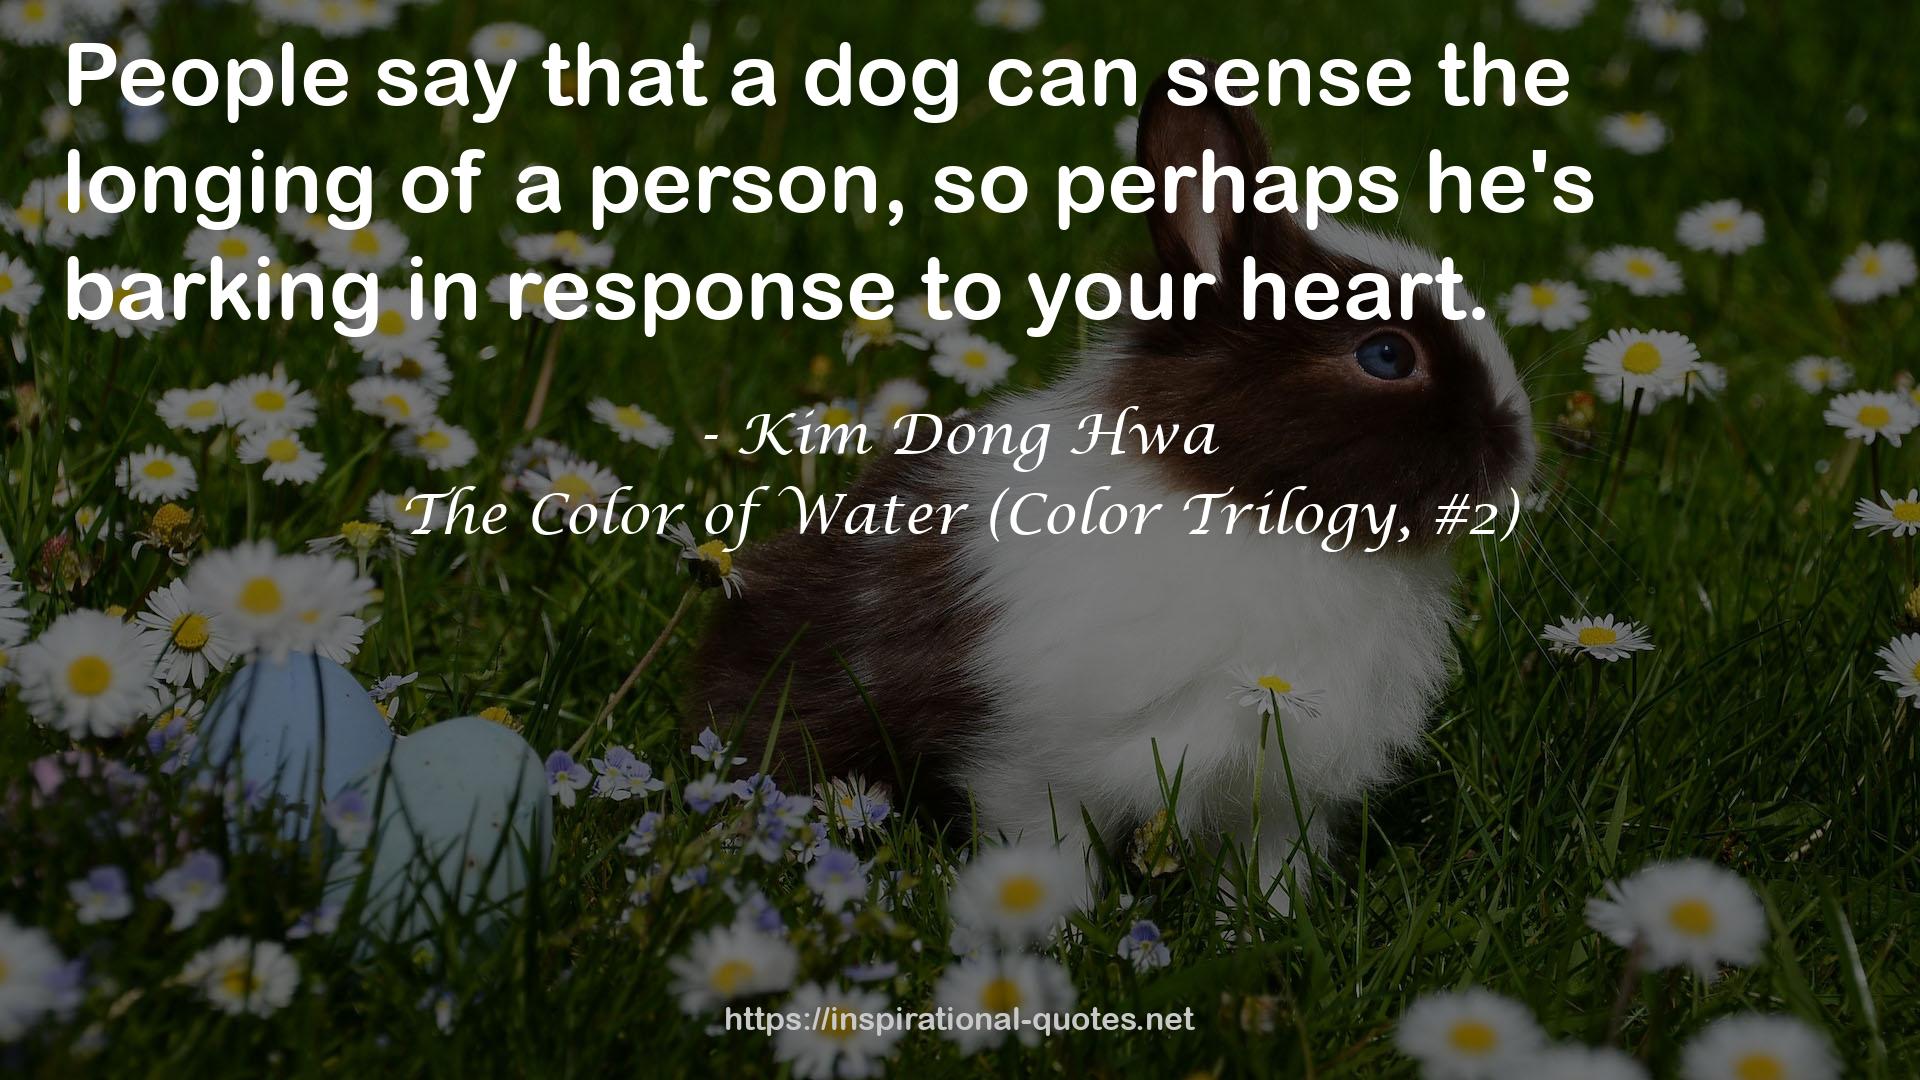 The Color of Water (Color Trilogy, #2) QUOTES